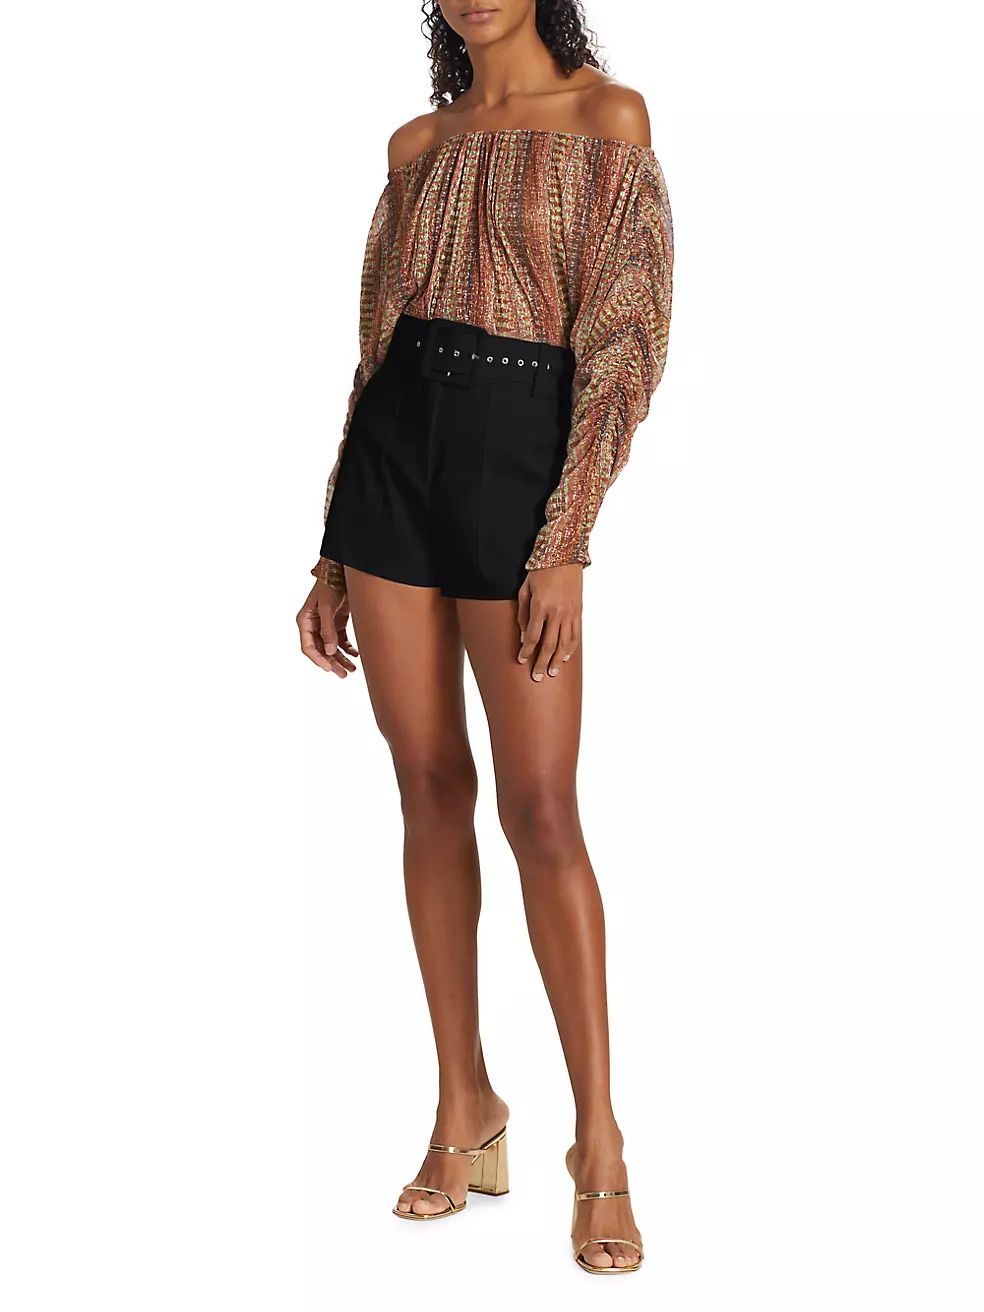 Kasey Belted High-Rise Shorts | Saks Fifth Avenue